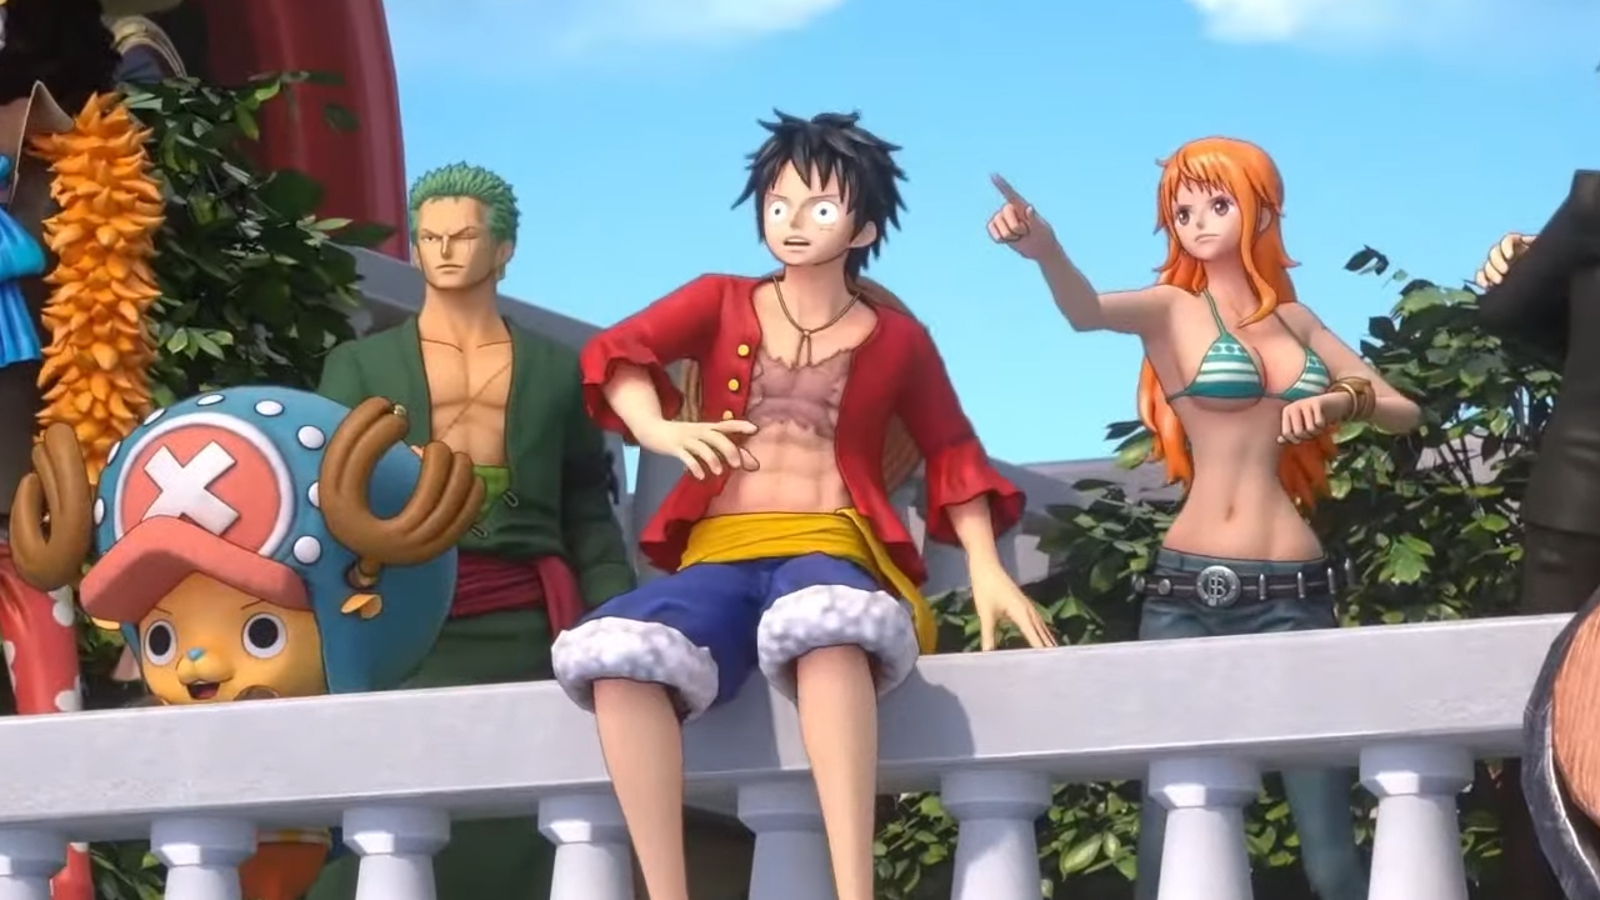 ONE PIECE ODYSSEY sets sail January 13th, 2023, preorders are now